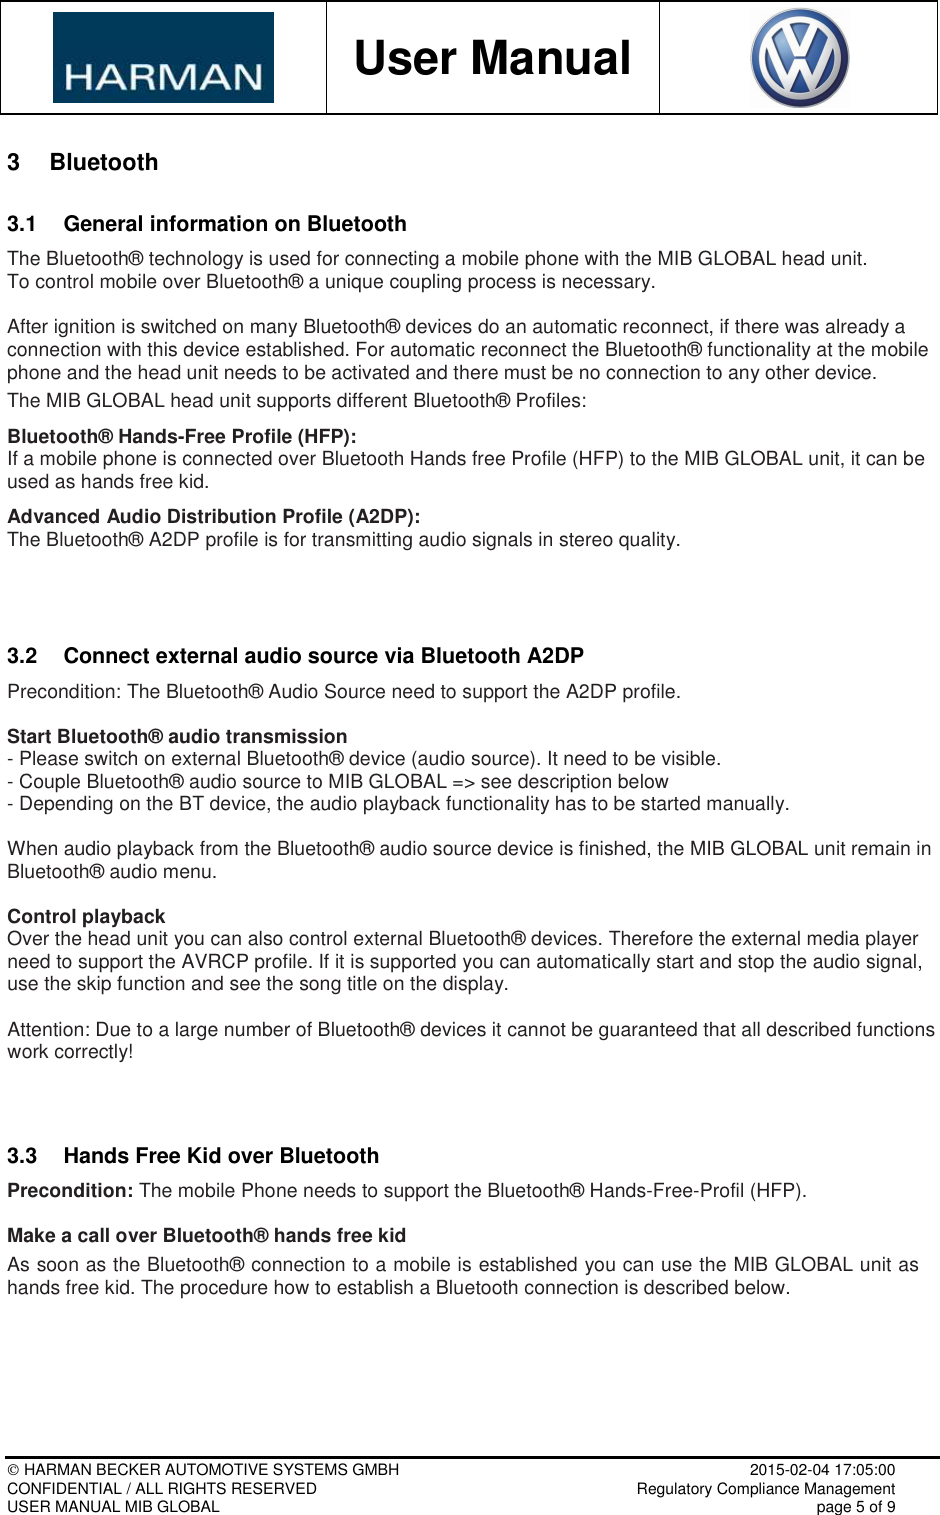           User Manual     HARMAN BECKER AUTOMOTIVE SYSTEMS GMBH    2015-02-04 17:05:00 CONFIDENTIAL / ALL RIGHTS RESERVED     Regulatory Compliance Management USER MANUAL MIB GLOBAL    page 5 of 9  3  Bluetooth 3.1  General information on Bluetooth The Bluetooth® technology is used for connecting a mobile phone with the MIB GLOBAL head unit.  To control mobile over Bluetooth® a unique coupling process is necessary.  After ignition is switched on many Bluetooth® devices do an automatic reconnect, if there was already a connection with this device established. For automatic reconnect the Bluetooth® functionality at the mobile phone and the head unit needs to be activated and there must be no connection to any other device. The MIB GLOBAL head unit supports different Bluetooth® Profiles:  Bluetooth® Hands-Free Profile (HFP): If a mobile phone is connected over Bluetooth Hands free Profile (HFP) to the MIB GLOBAL unit, it can be used as hands free kid.   Advanced Audio Distribution Profile (A2DP): The Bluetooth® A2DP profile is for transmitting audio signals in stereo quality.   3.2  Connect external audio source via Bluetooth A2DP Precondition: The Bluetooth® Audio Source need to support the A2DP profile.  Start Bluetooth® audio transmission - Please switch on external Bluetooth® device (audio source). It need to be visible. - Couple Bluetooth® audio source to MIB GLOBAL =&gt; see description below - Depending on the BT device, the audio playback functionality has to be started manually.  When audio playback from the Bluetooth® audio source device is finished, the MIB GLOBAL unit remain in Bluetooth® audio menu.  Control playback Over the head unit you can also control external Bluetooth® devices. Therefore the external media player need to support the AVRCP profile. If it is supported you can automatically start and stop the audio signal, use the skip function and see the song title on the display.  Attention: Due to a large number of Bluetooth® devices it cannot be guaranteed that all described functions work correctly!   3.3  Hands Free Kid over Bluetooth Precondition: The mobile Phone needs to support the Bluetooth® Hands-Free-Profil (HFP).  Make a call over Bluetooth® hands free kid As soon as the Bluetooth® connection to a mobile is established you can use the MIB GLOBAL unit as hands free kid. The procedure how to establish a Bluetooth connection is described below.  